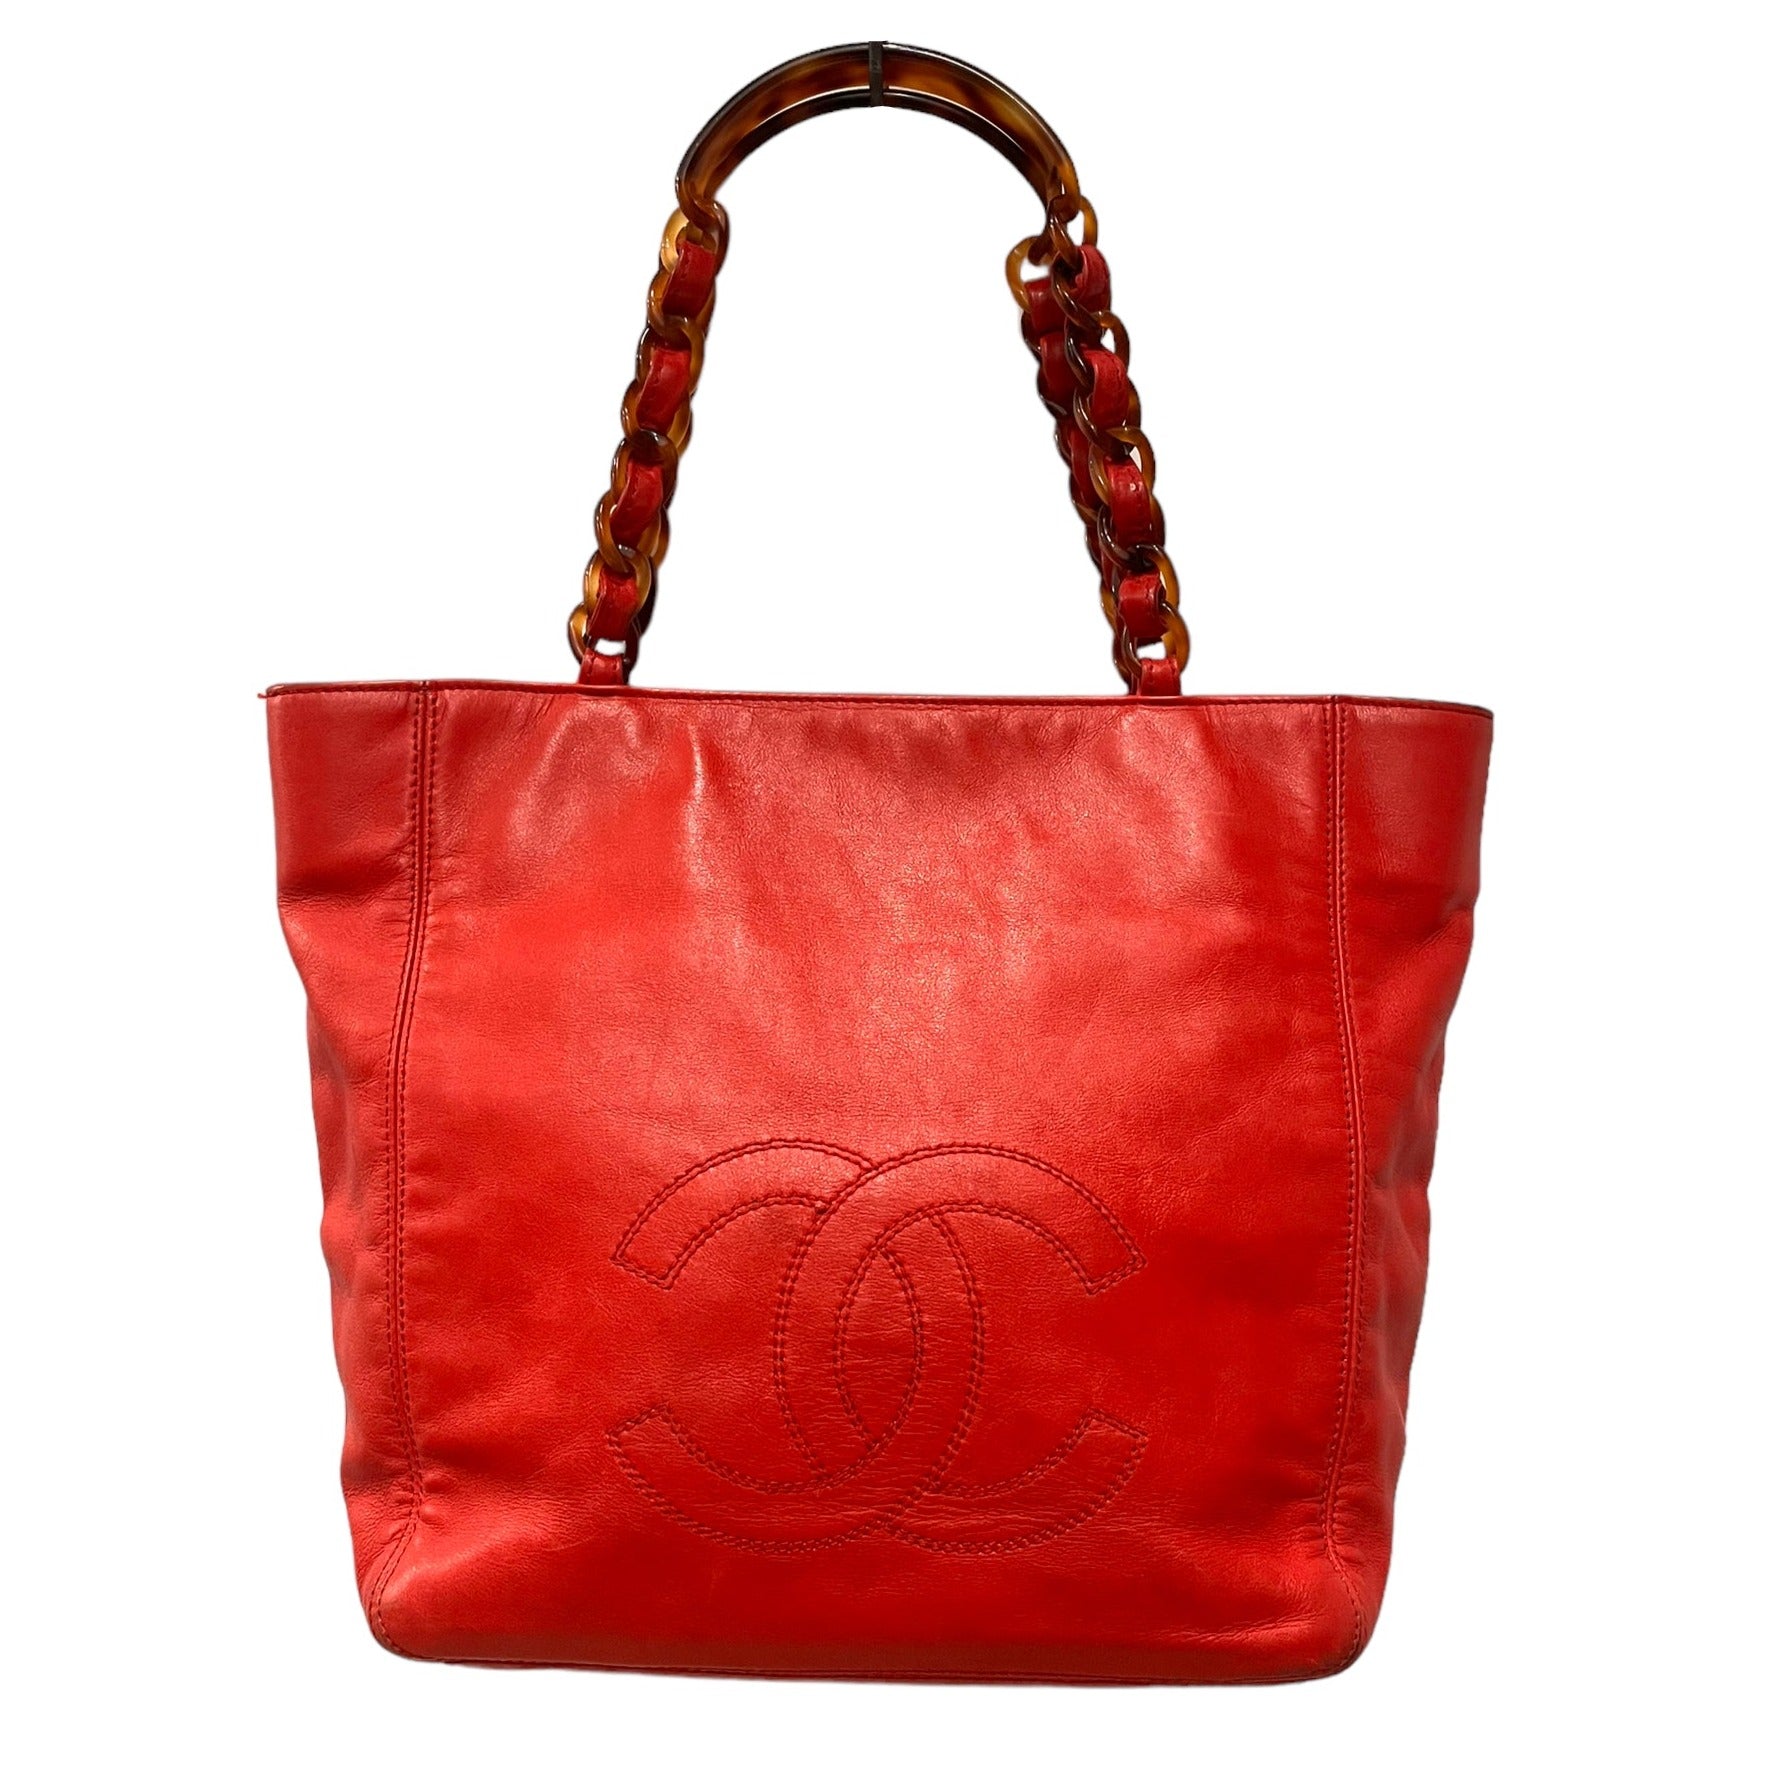 CHANEL/Tote Bag/Lambskin/RED/vintage tortoise shell braid – 2nd